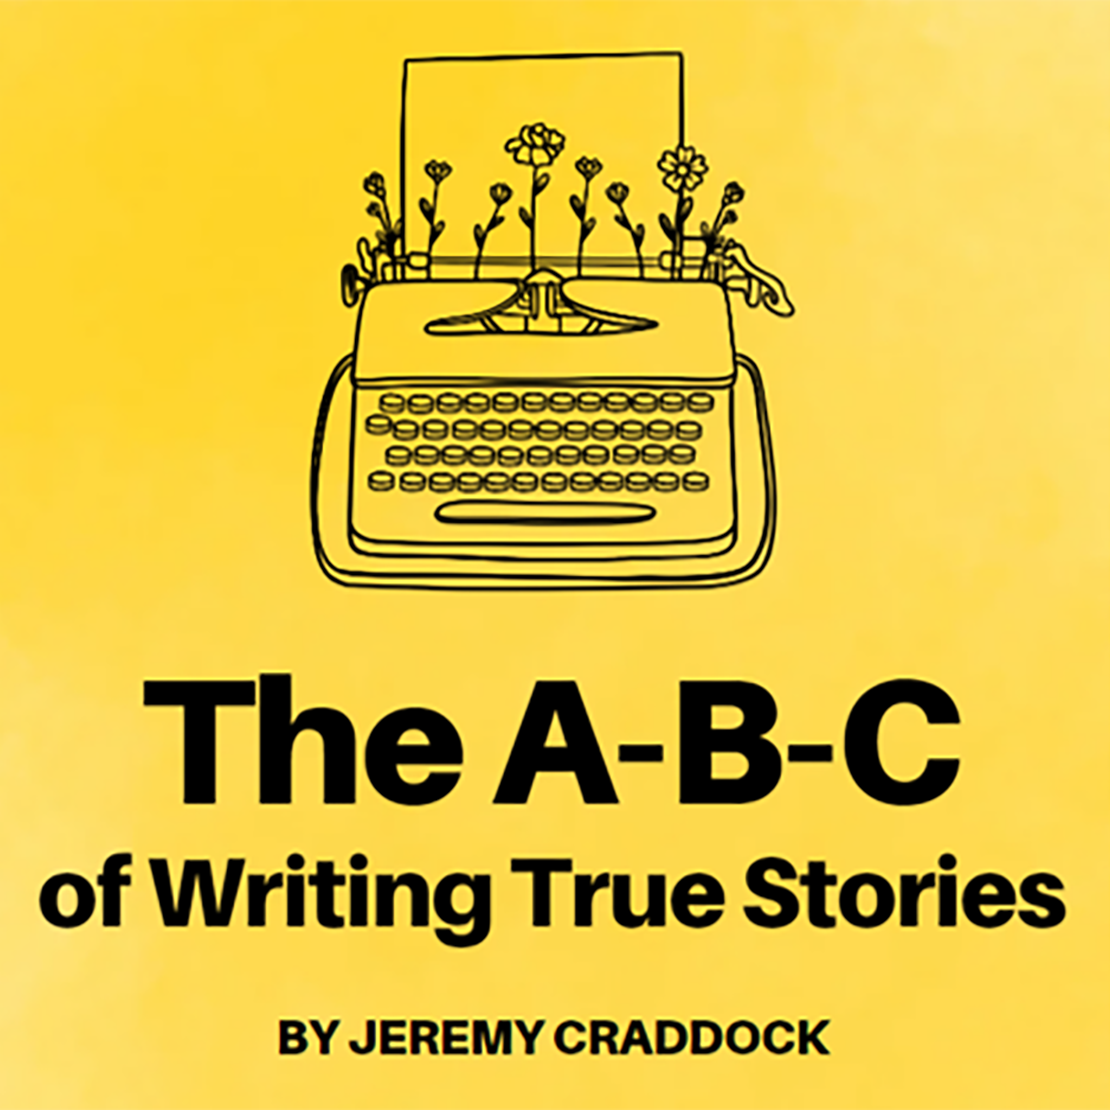 The A-B-C of Writing True Stories